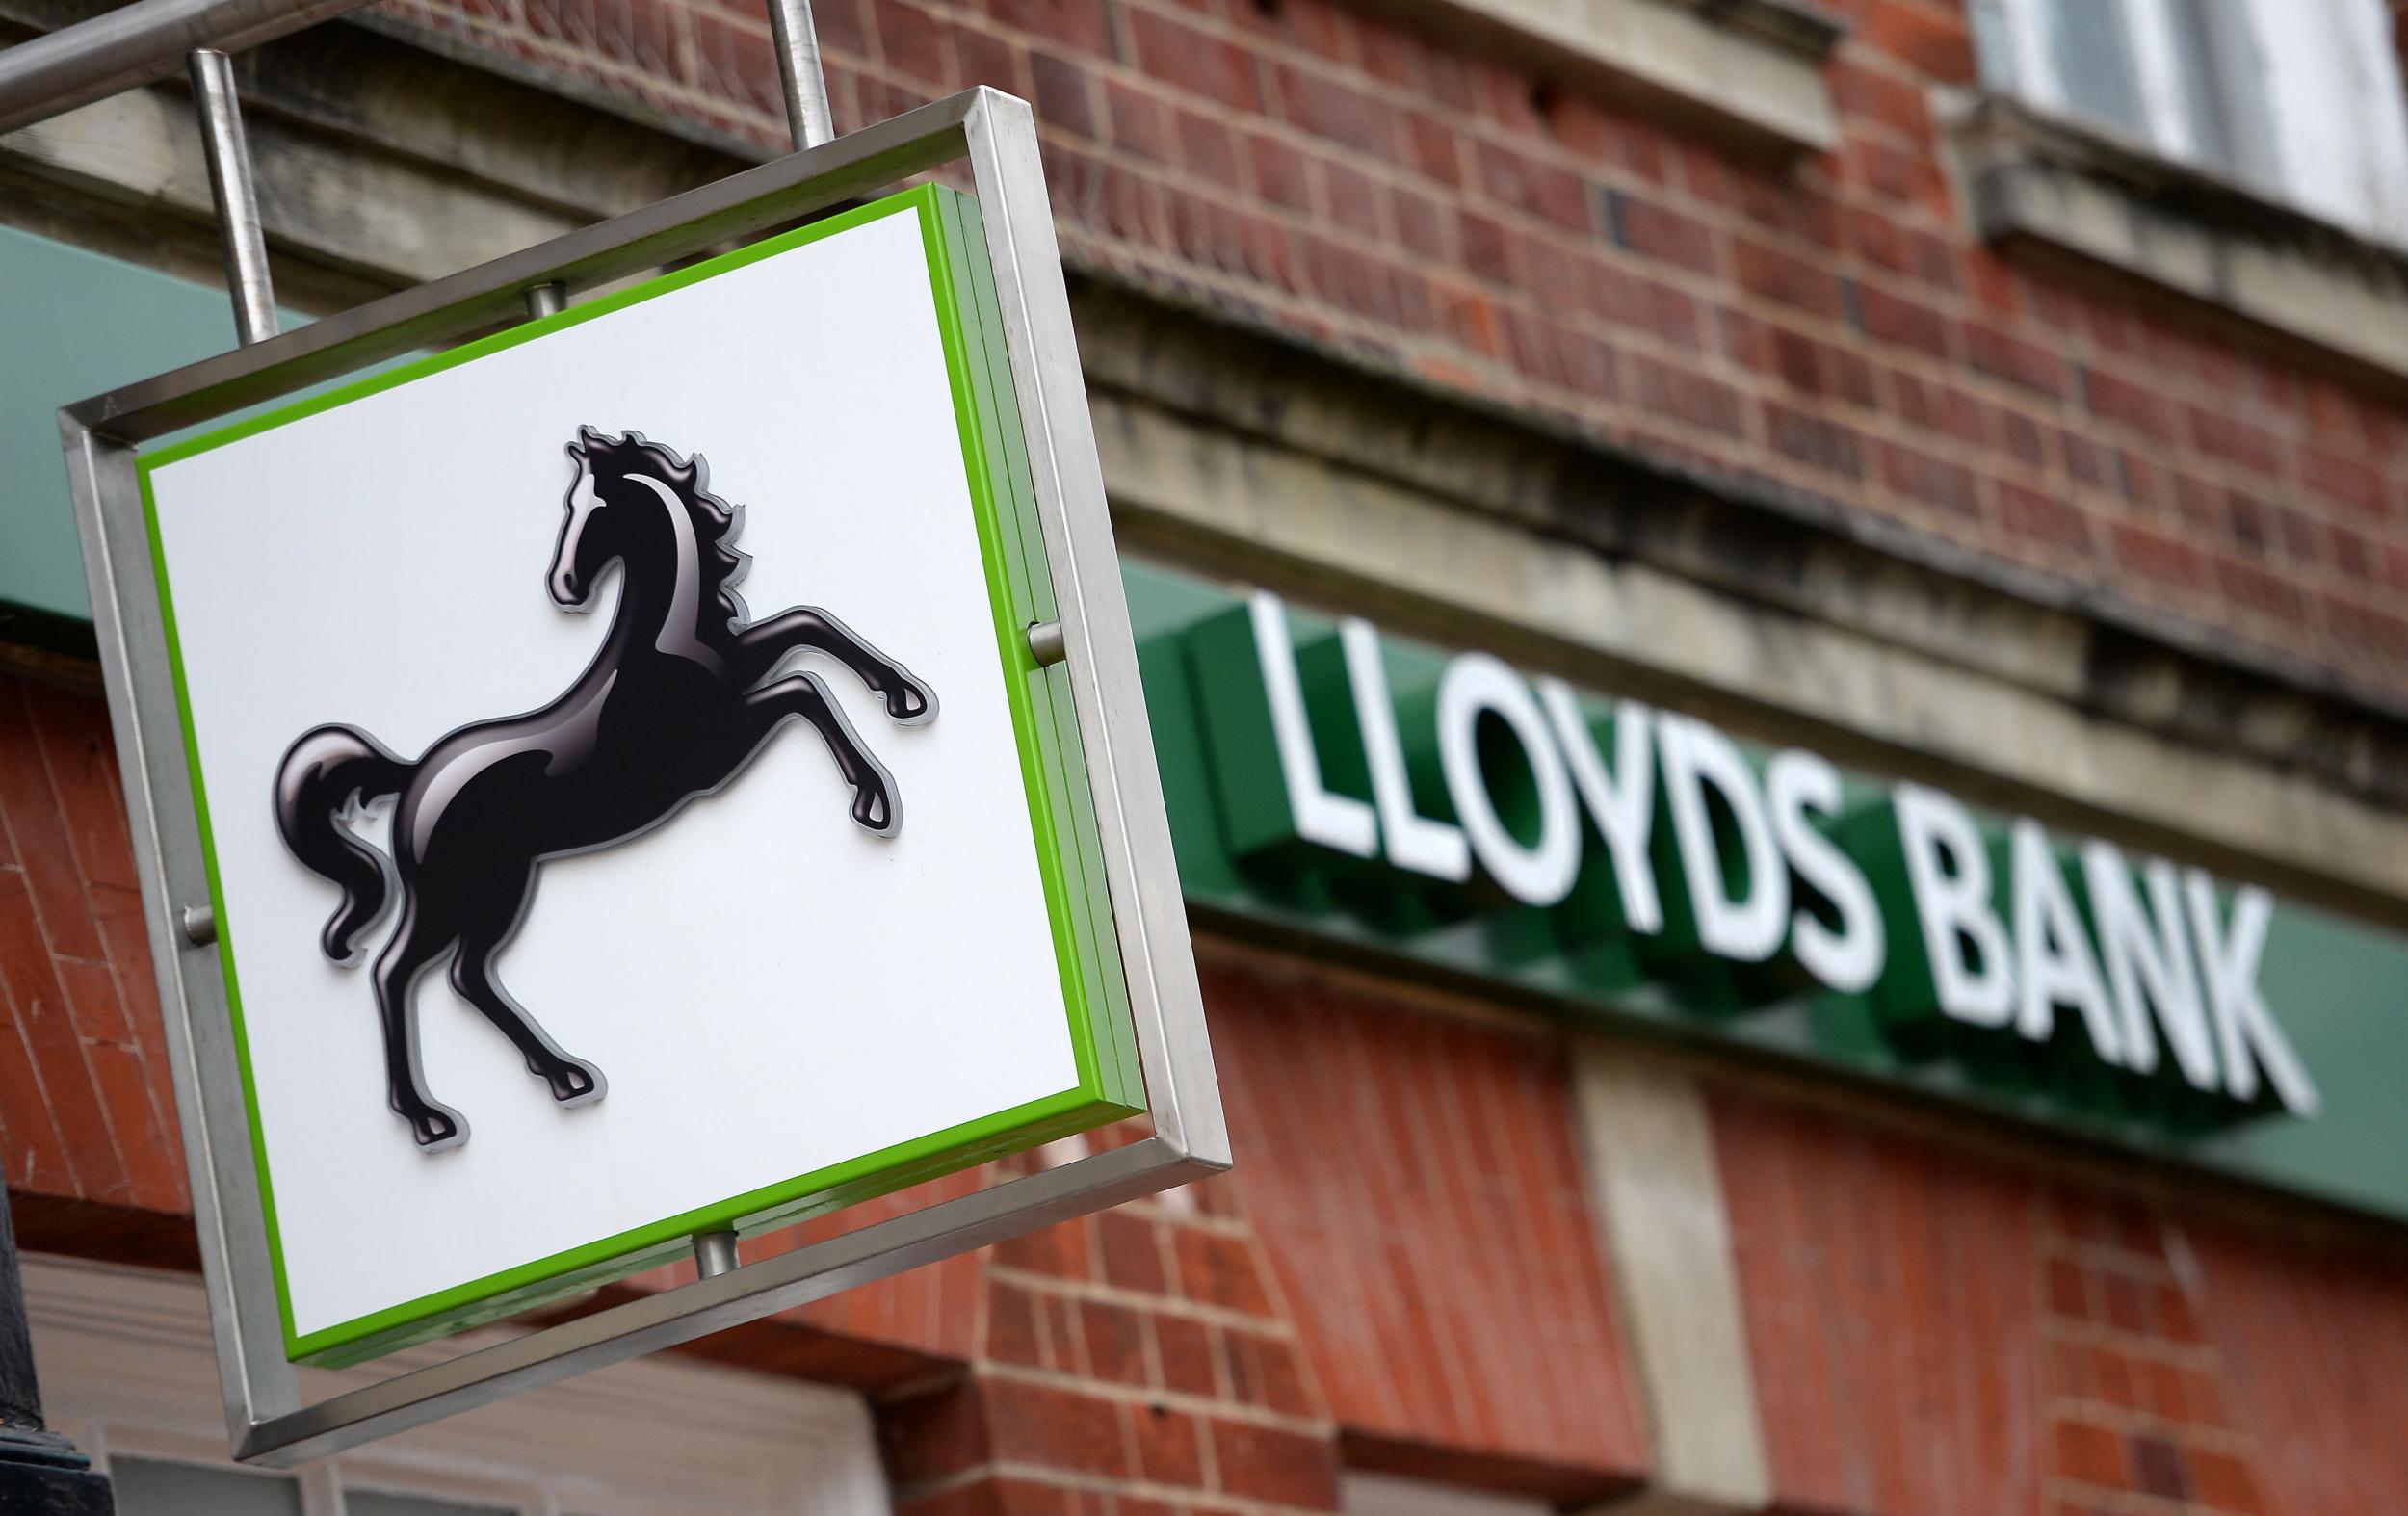 More staff to go at Lloyds. Will service suffer?